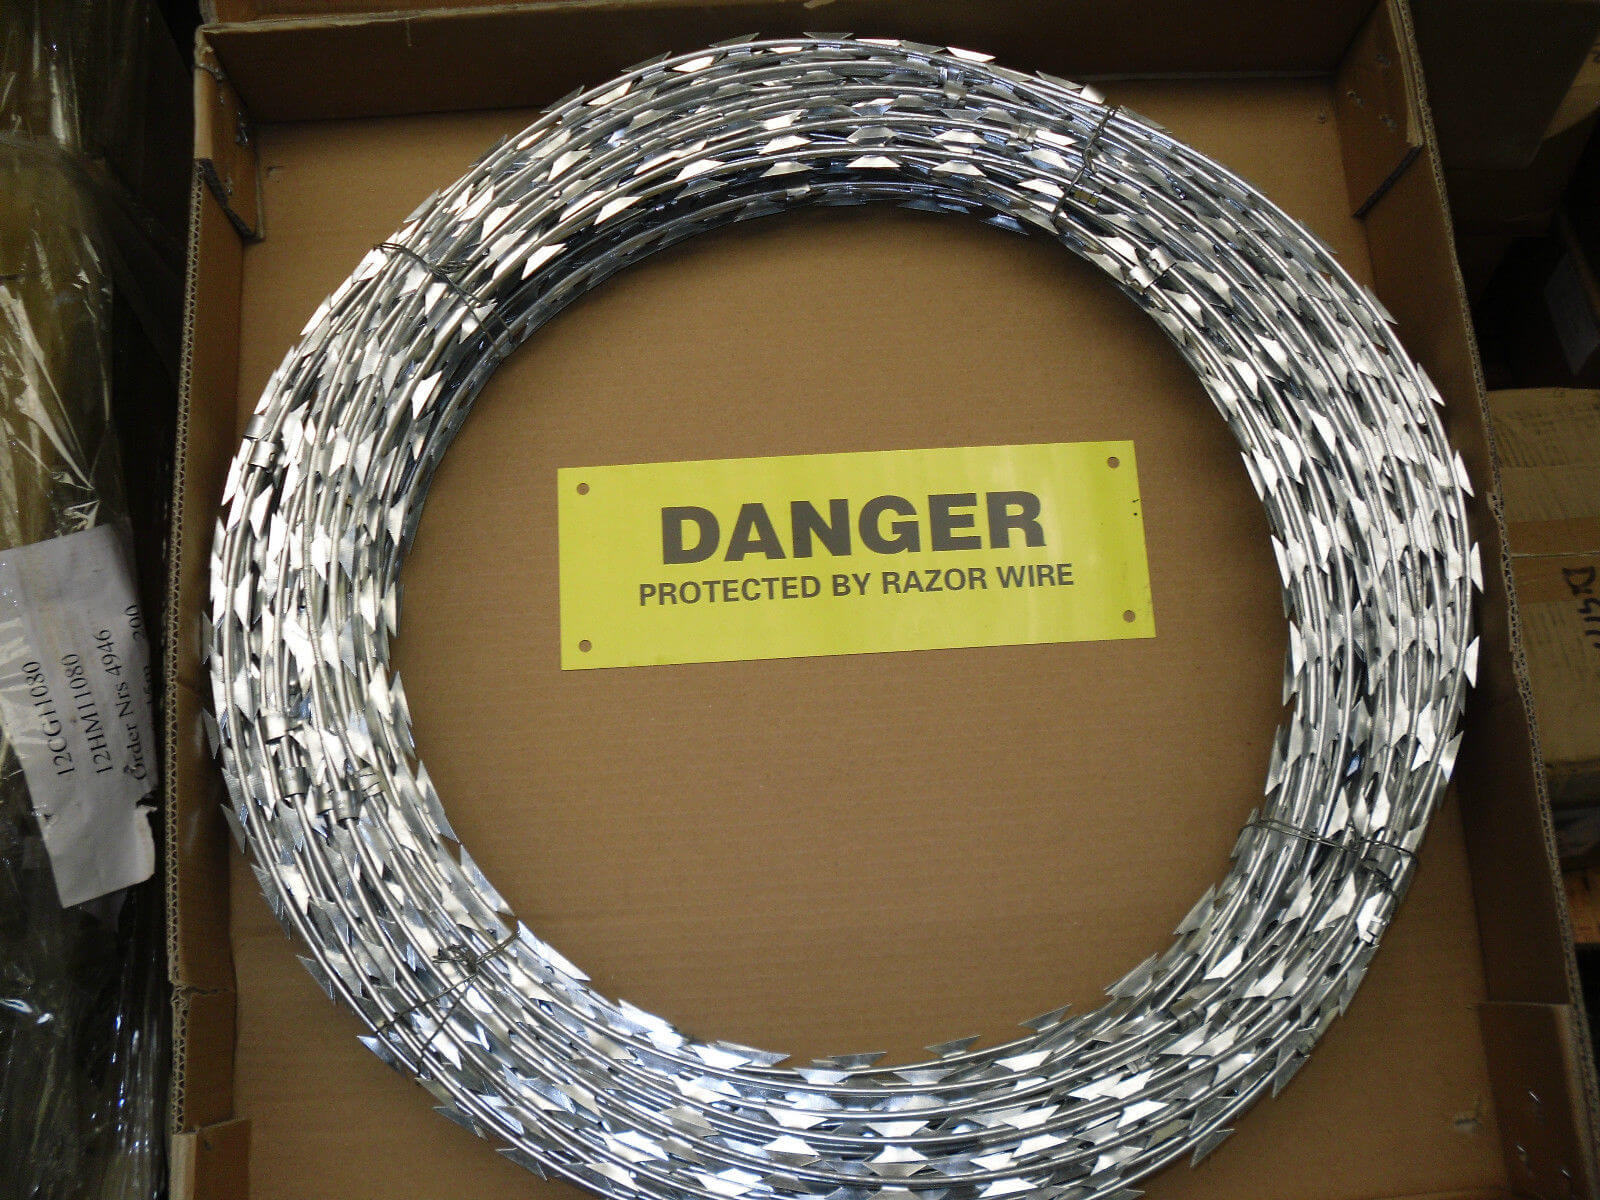 Wel: The Trusted Name in Razor Wire Fencing